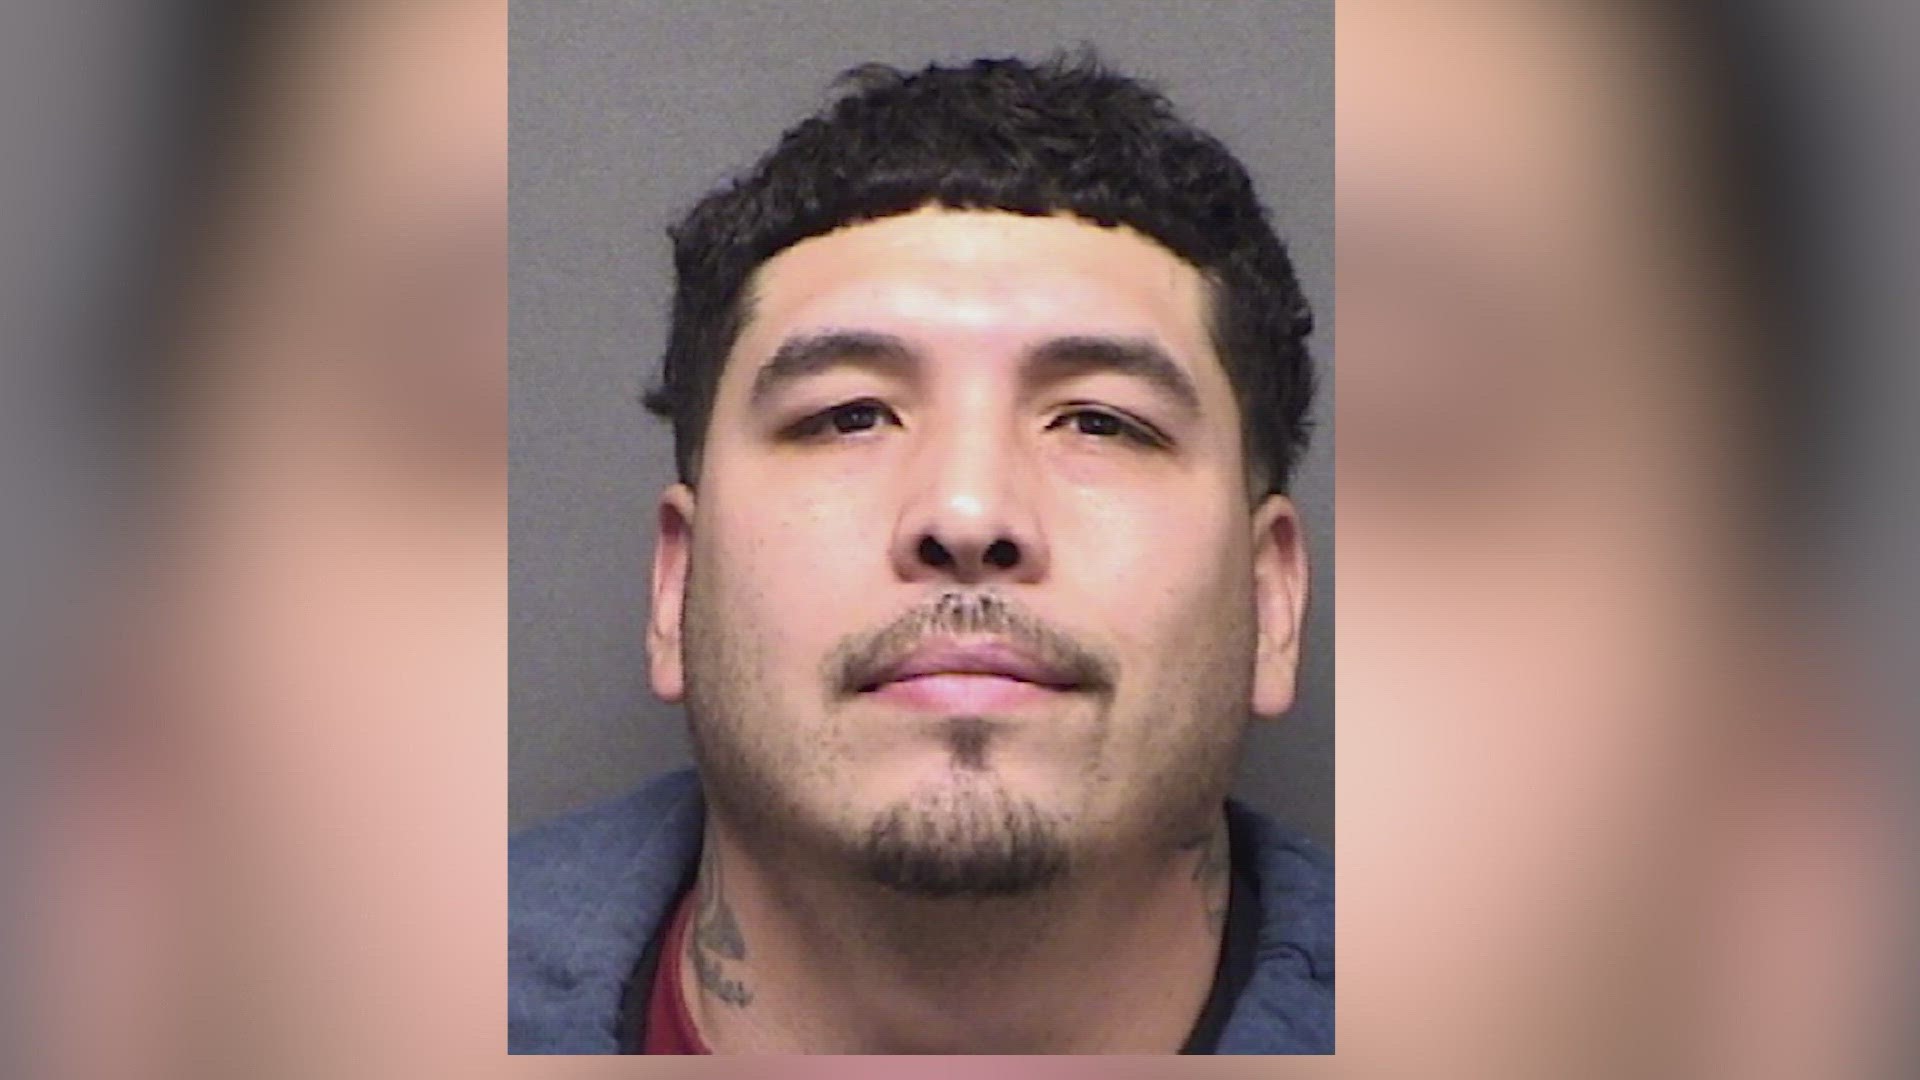 A man is accused of brutally beating and choking his girlfriend and this is not the first time the suspect is facing charges of assault, authorities said.